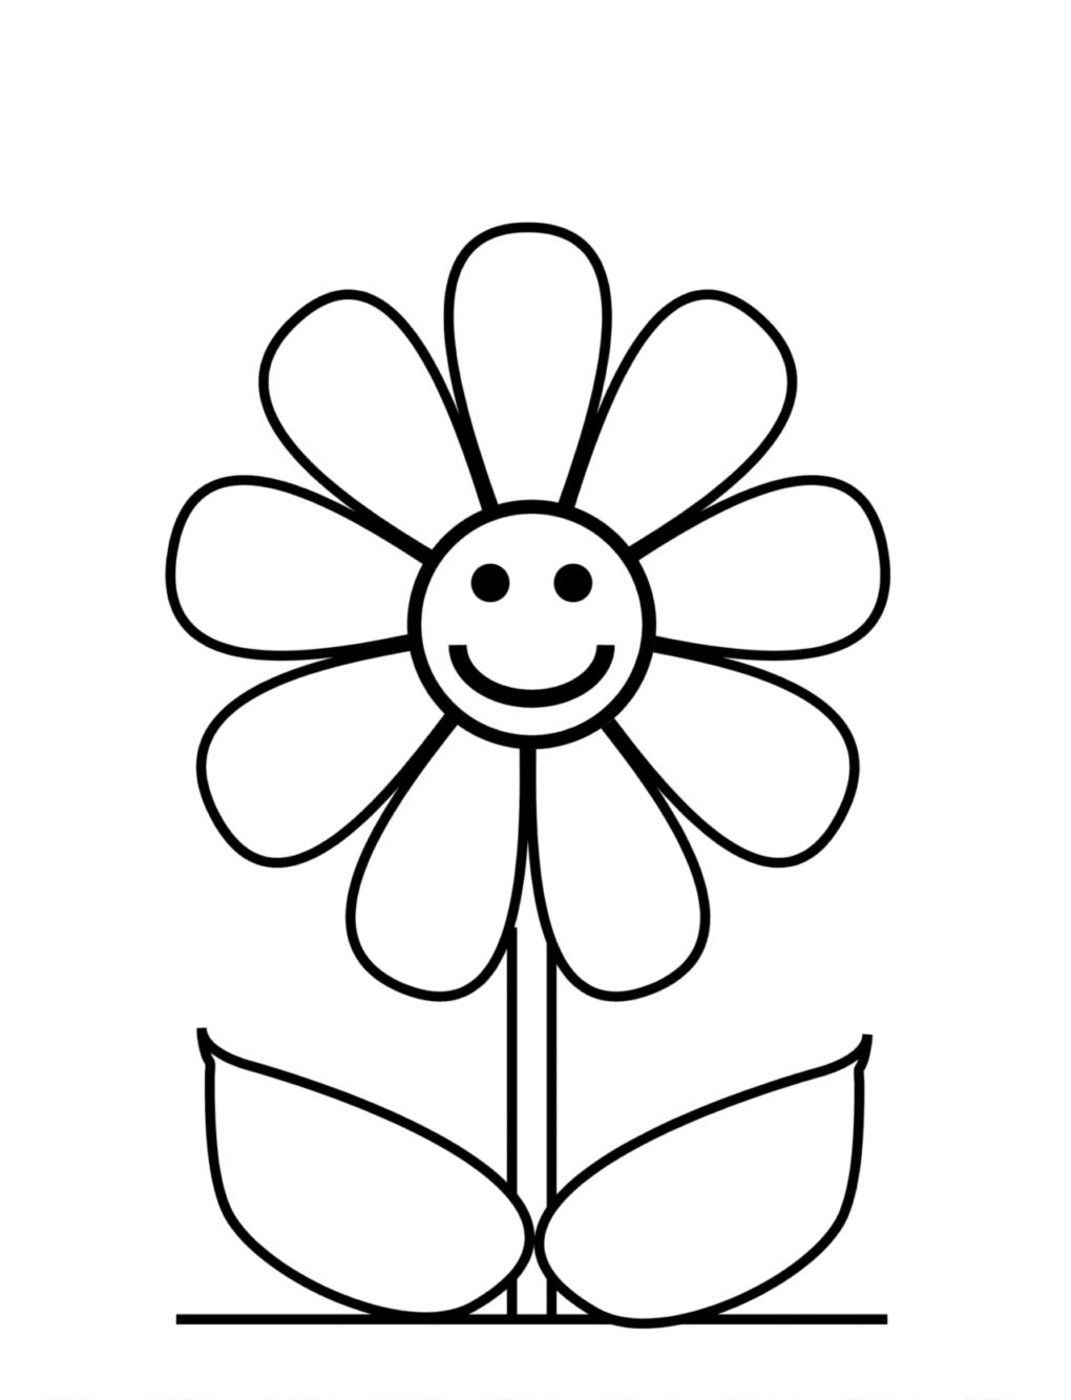 Flower Coloring Pages For Girls
 Coloring Pages For Girls